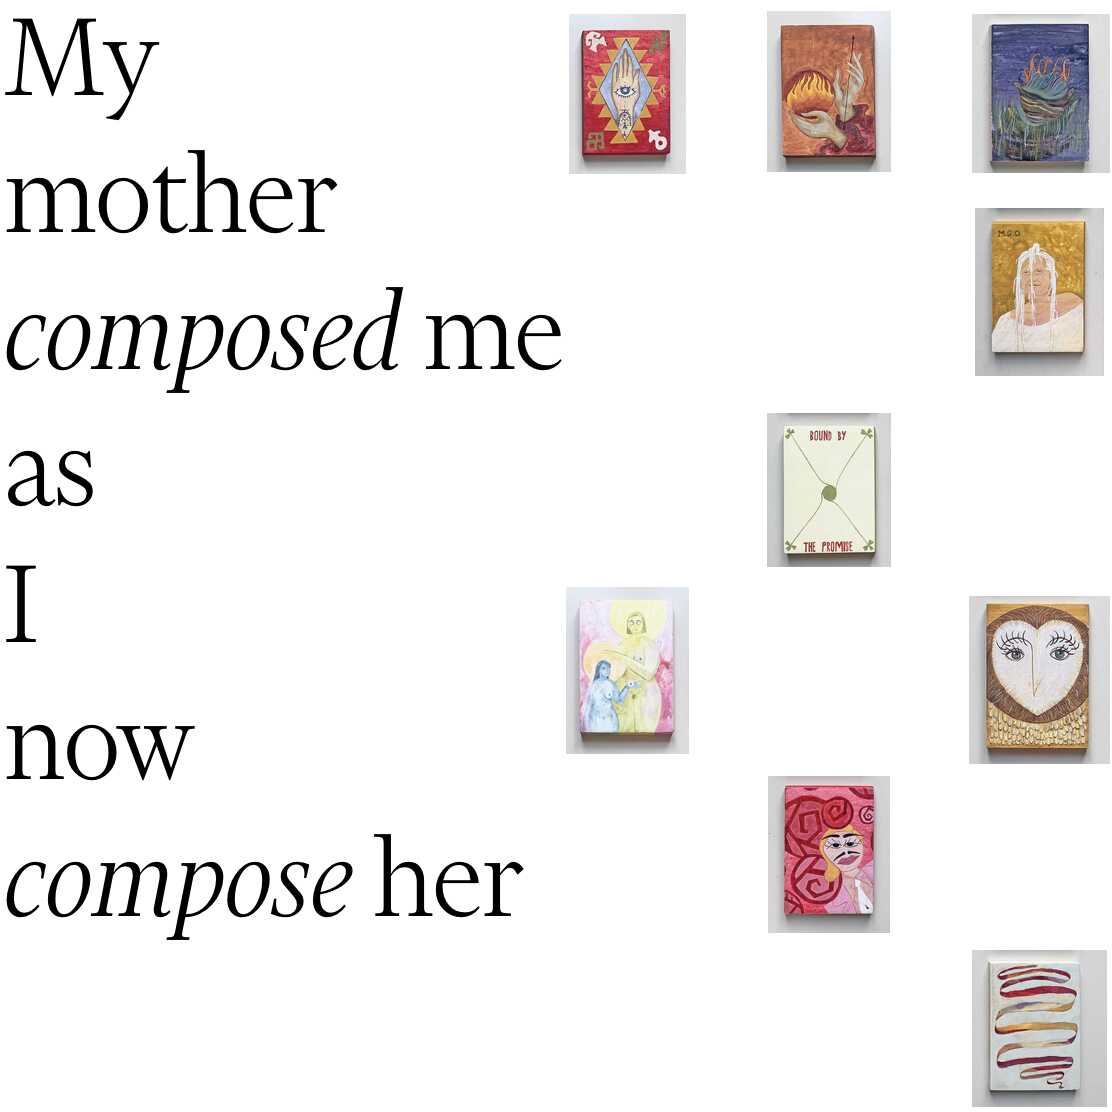 My mother composed me as I now compose her